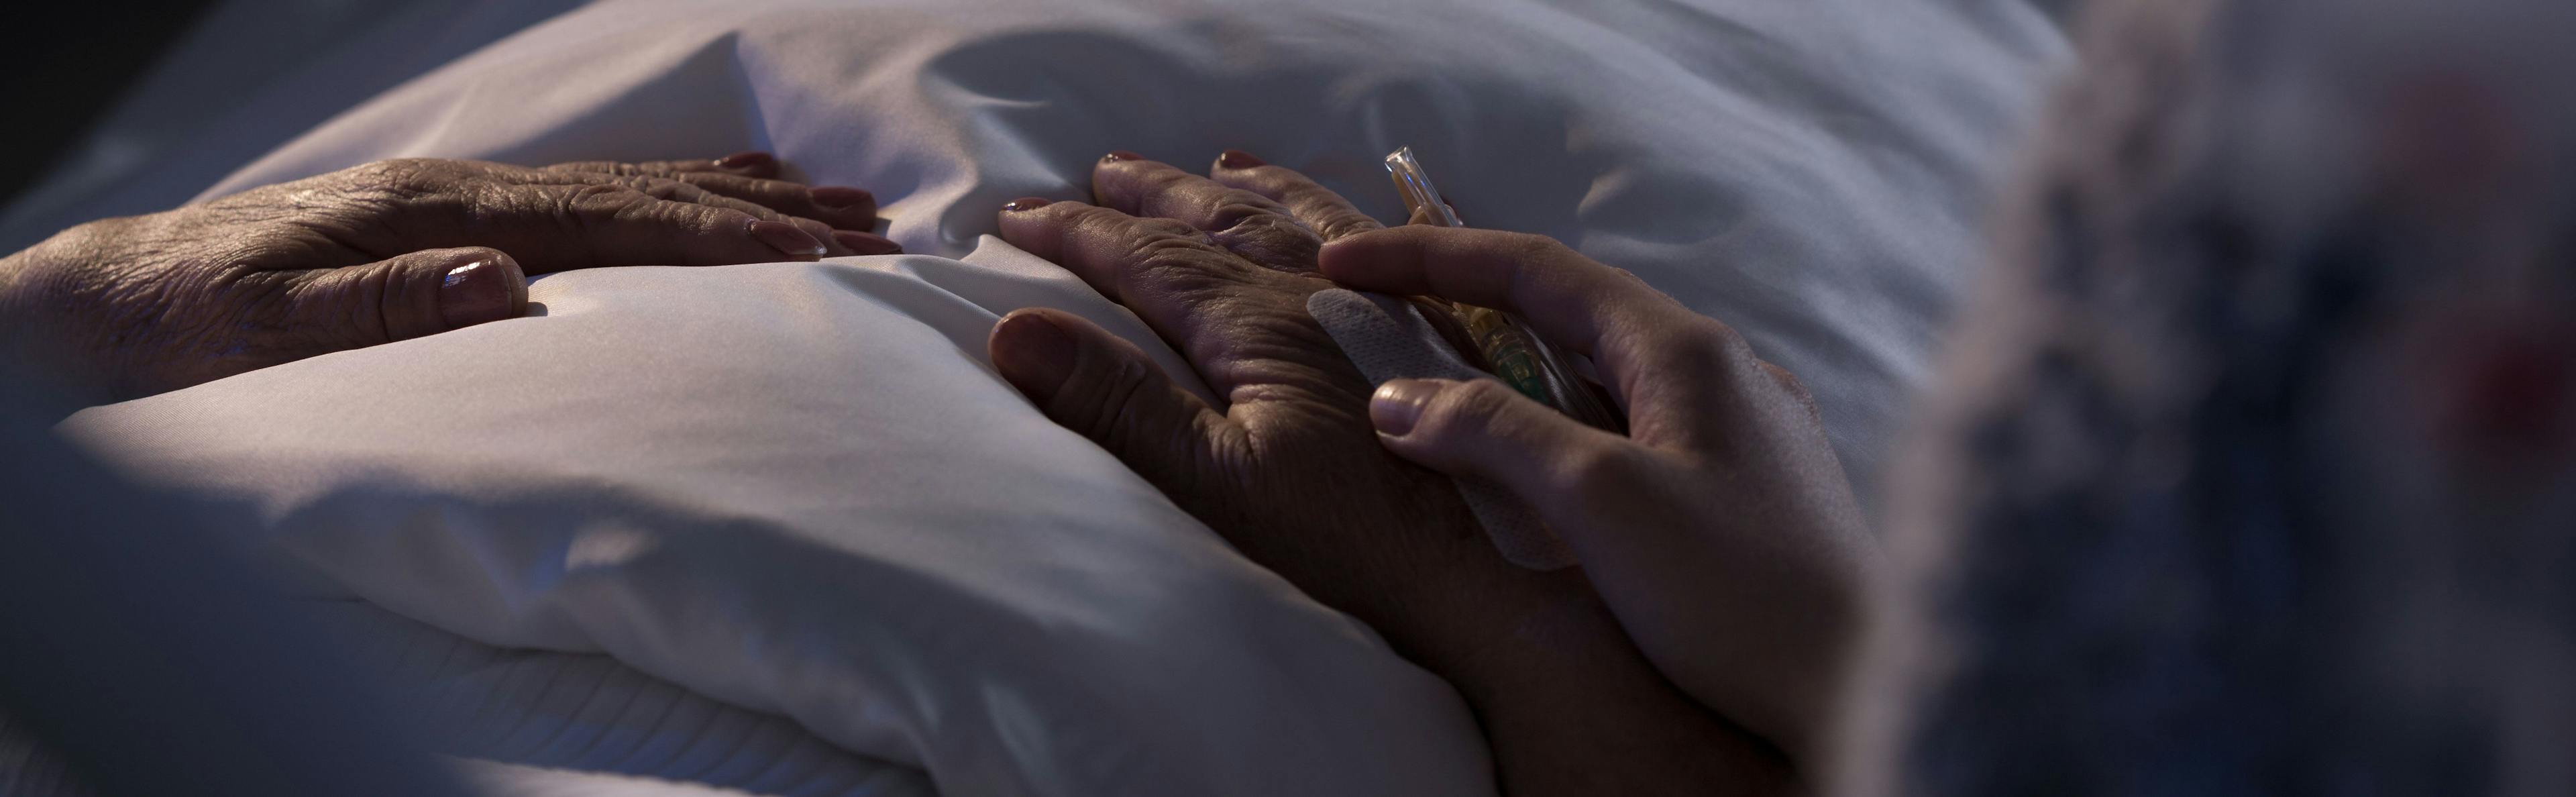 Forbidding Medical Aid in Dying Requires Justification 